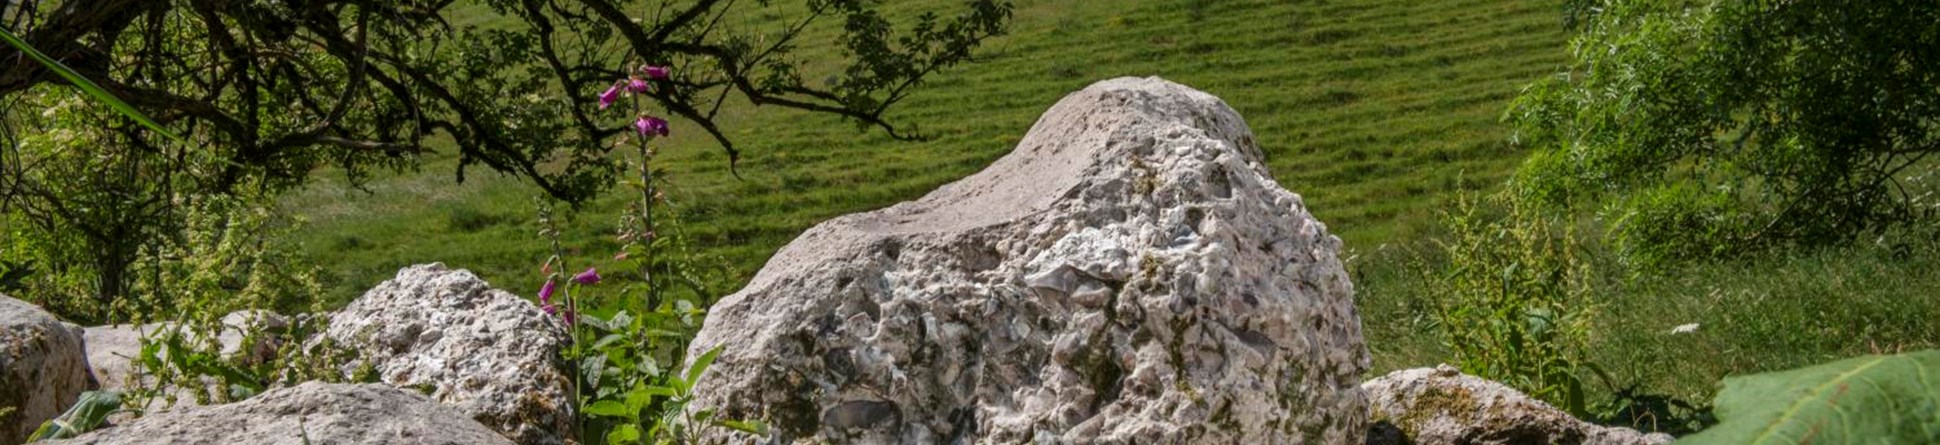 A photograph of a stone boulder in a field. The boulder has a scoop-shaped profile on one side resulting from its use as a polishing stone for Stone Age axe-heads.